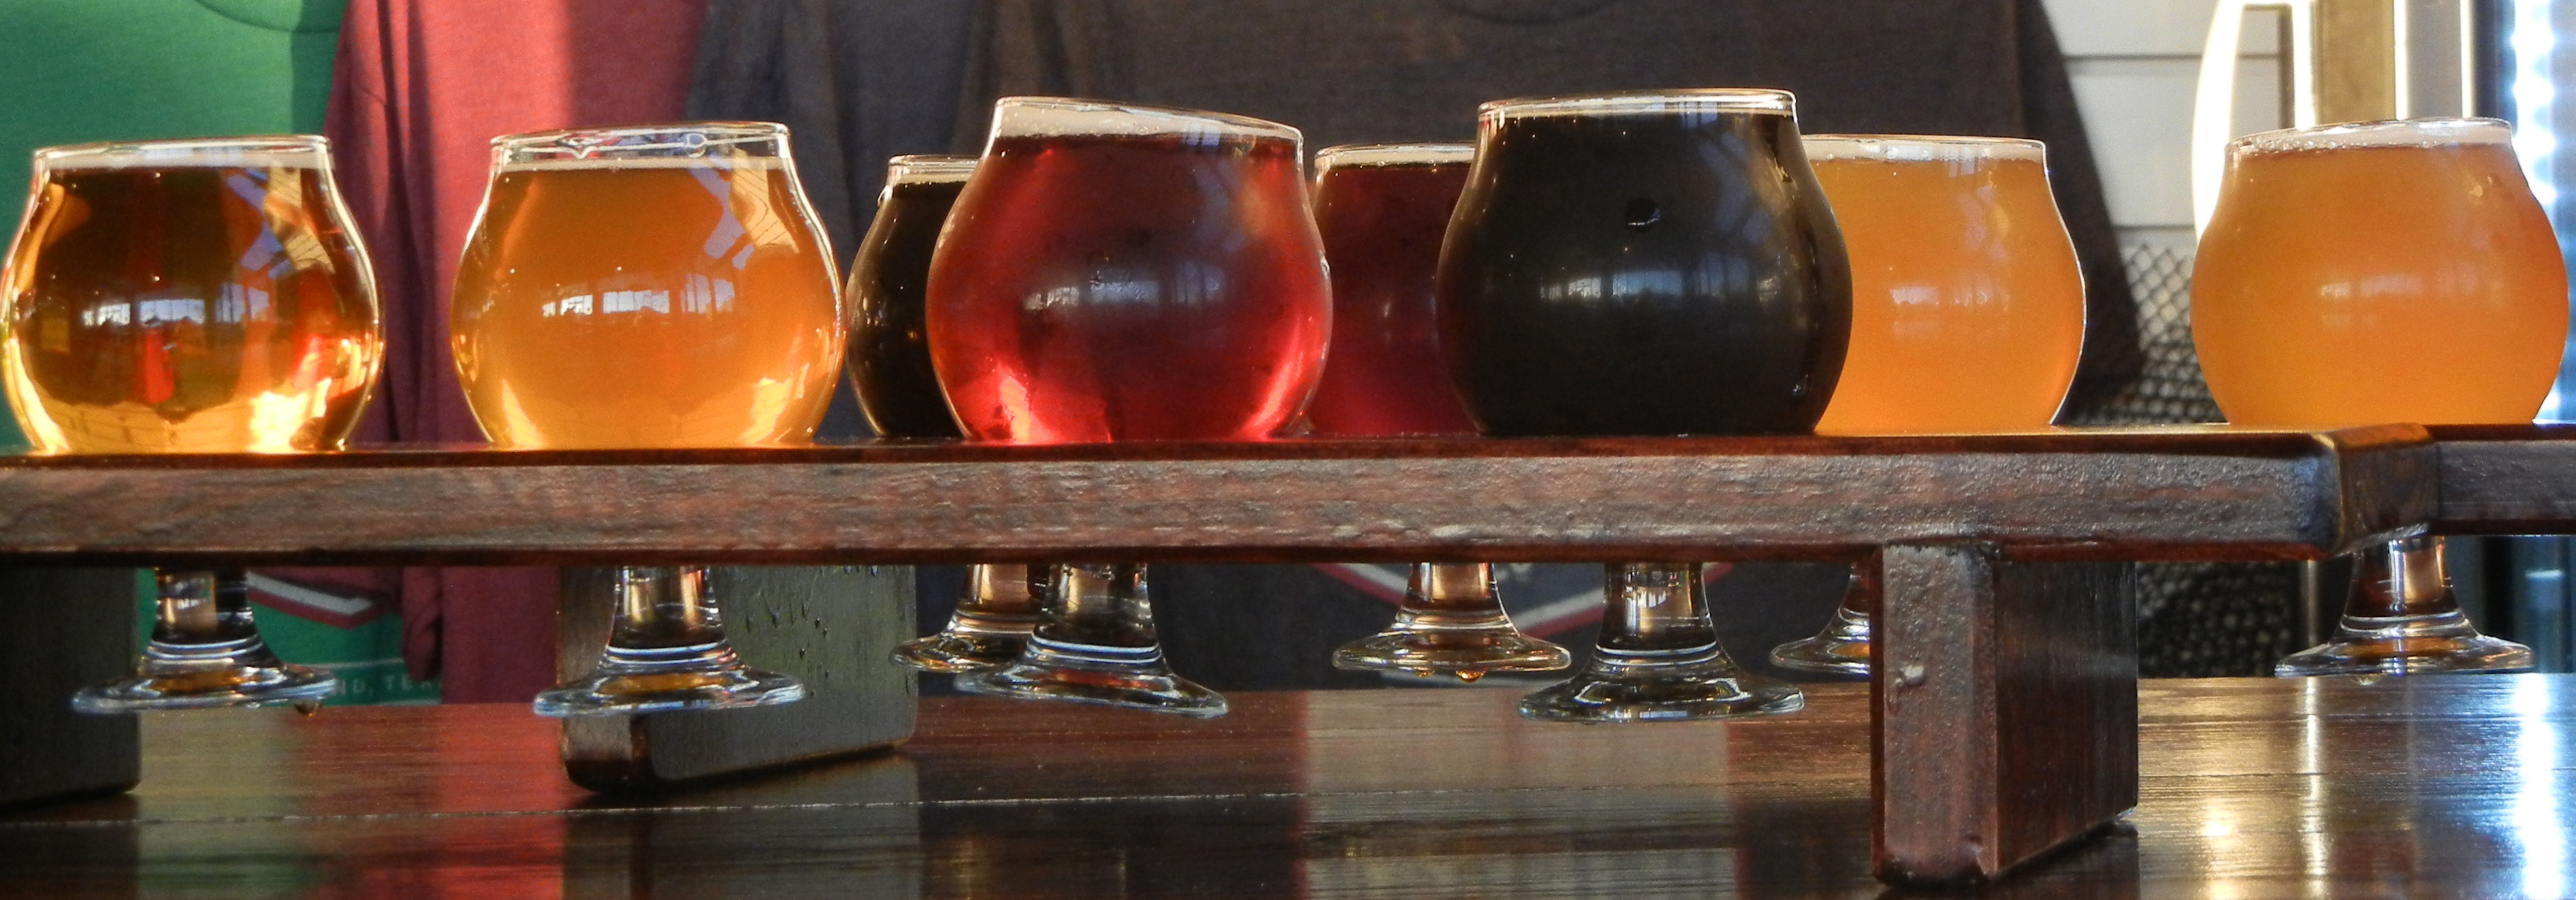 A sampler of beer varieties at BAKFISH microbrewery in Pearland, TX. Photo by The Signal reporter Robin Timme.